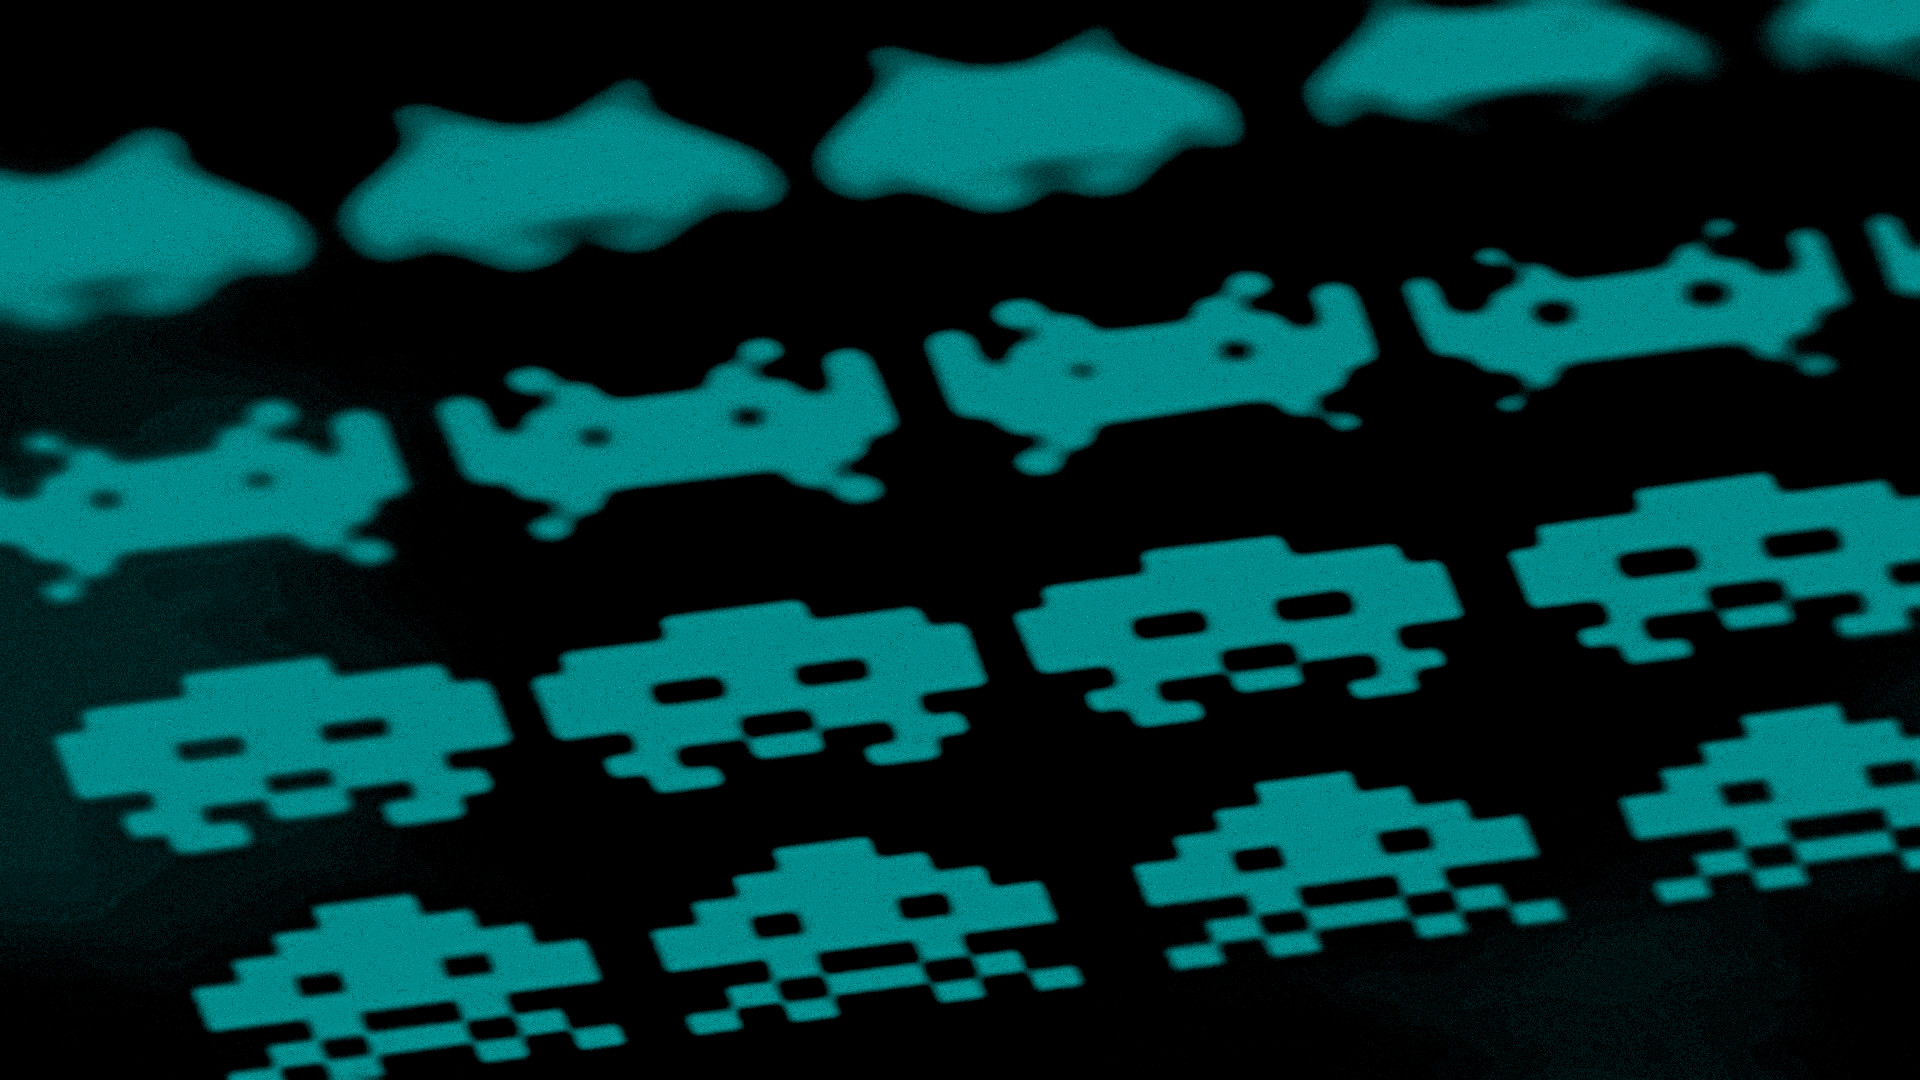 Space Invaders: Anniversary